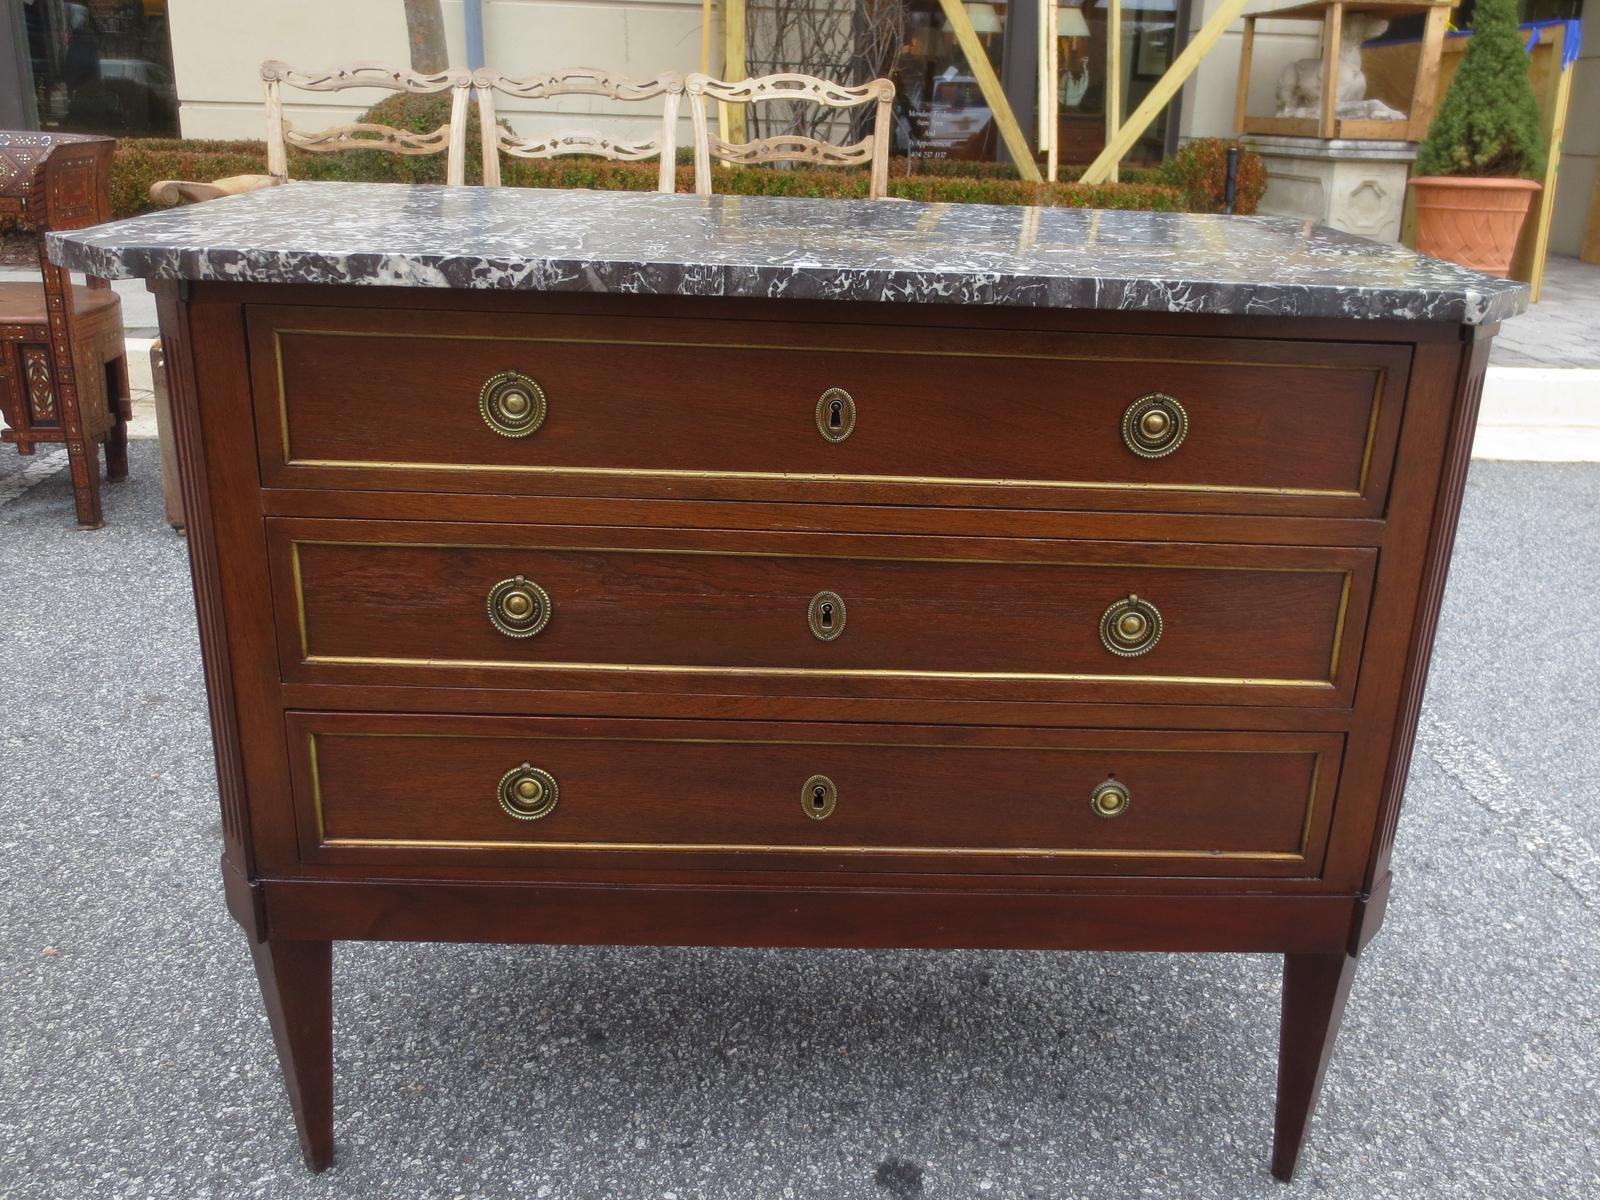 18th-19th century marble-top Louis XVI style mahogany chest.